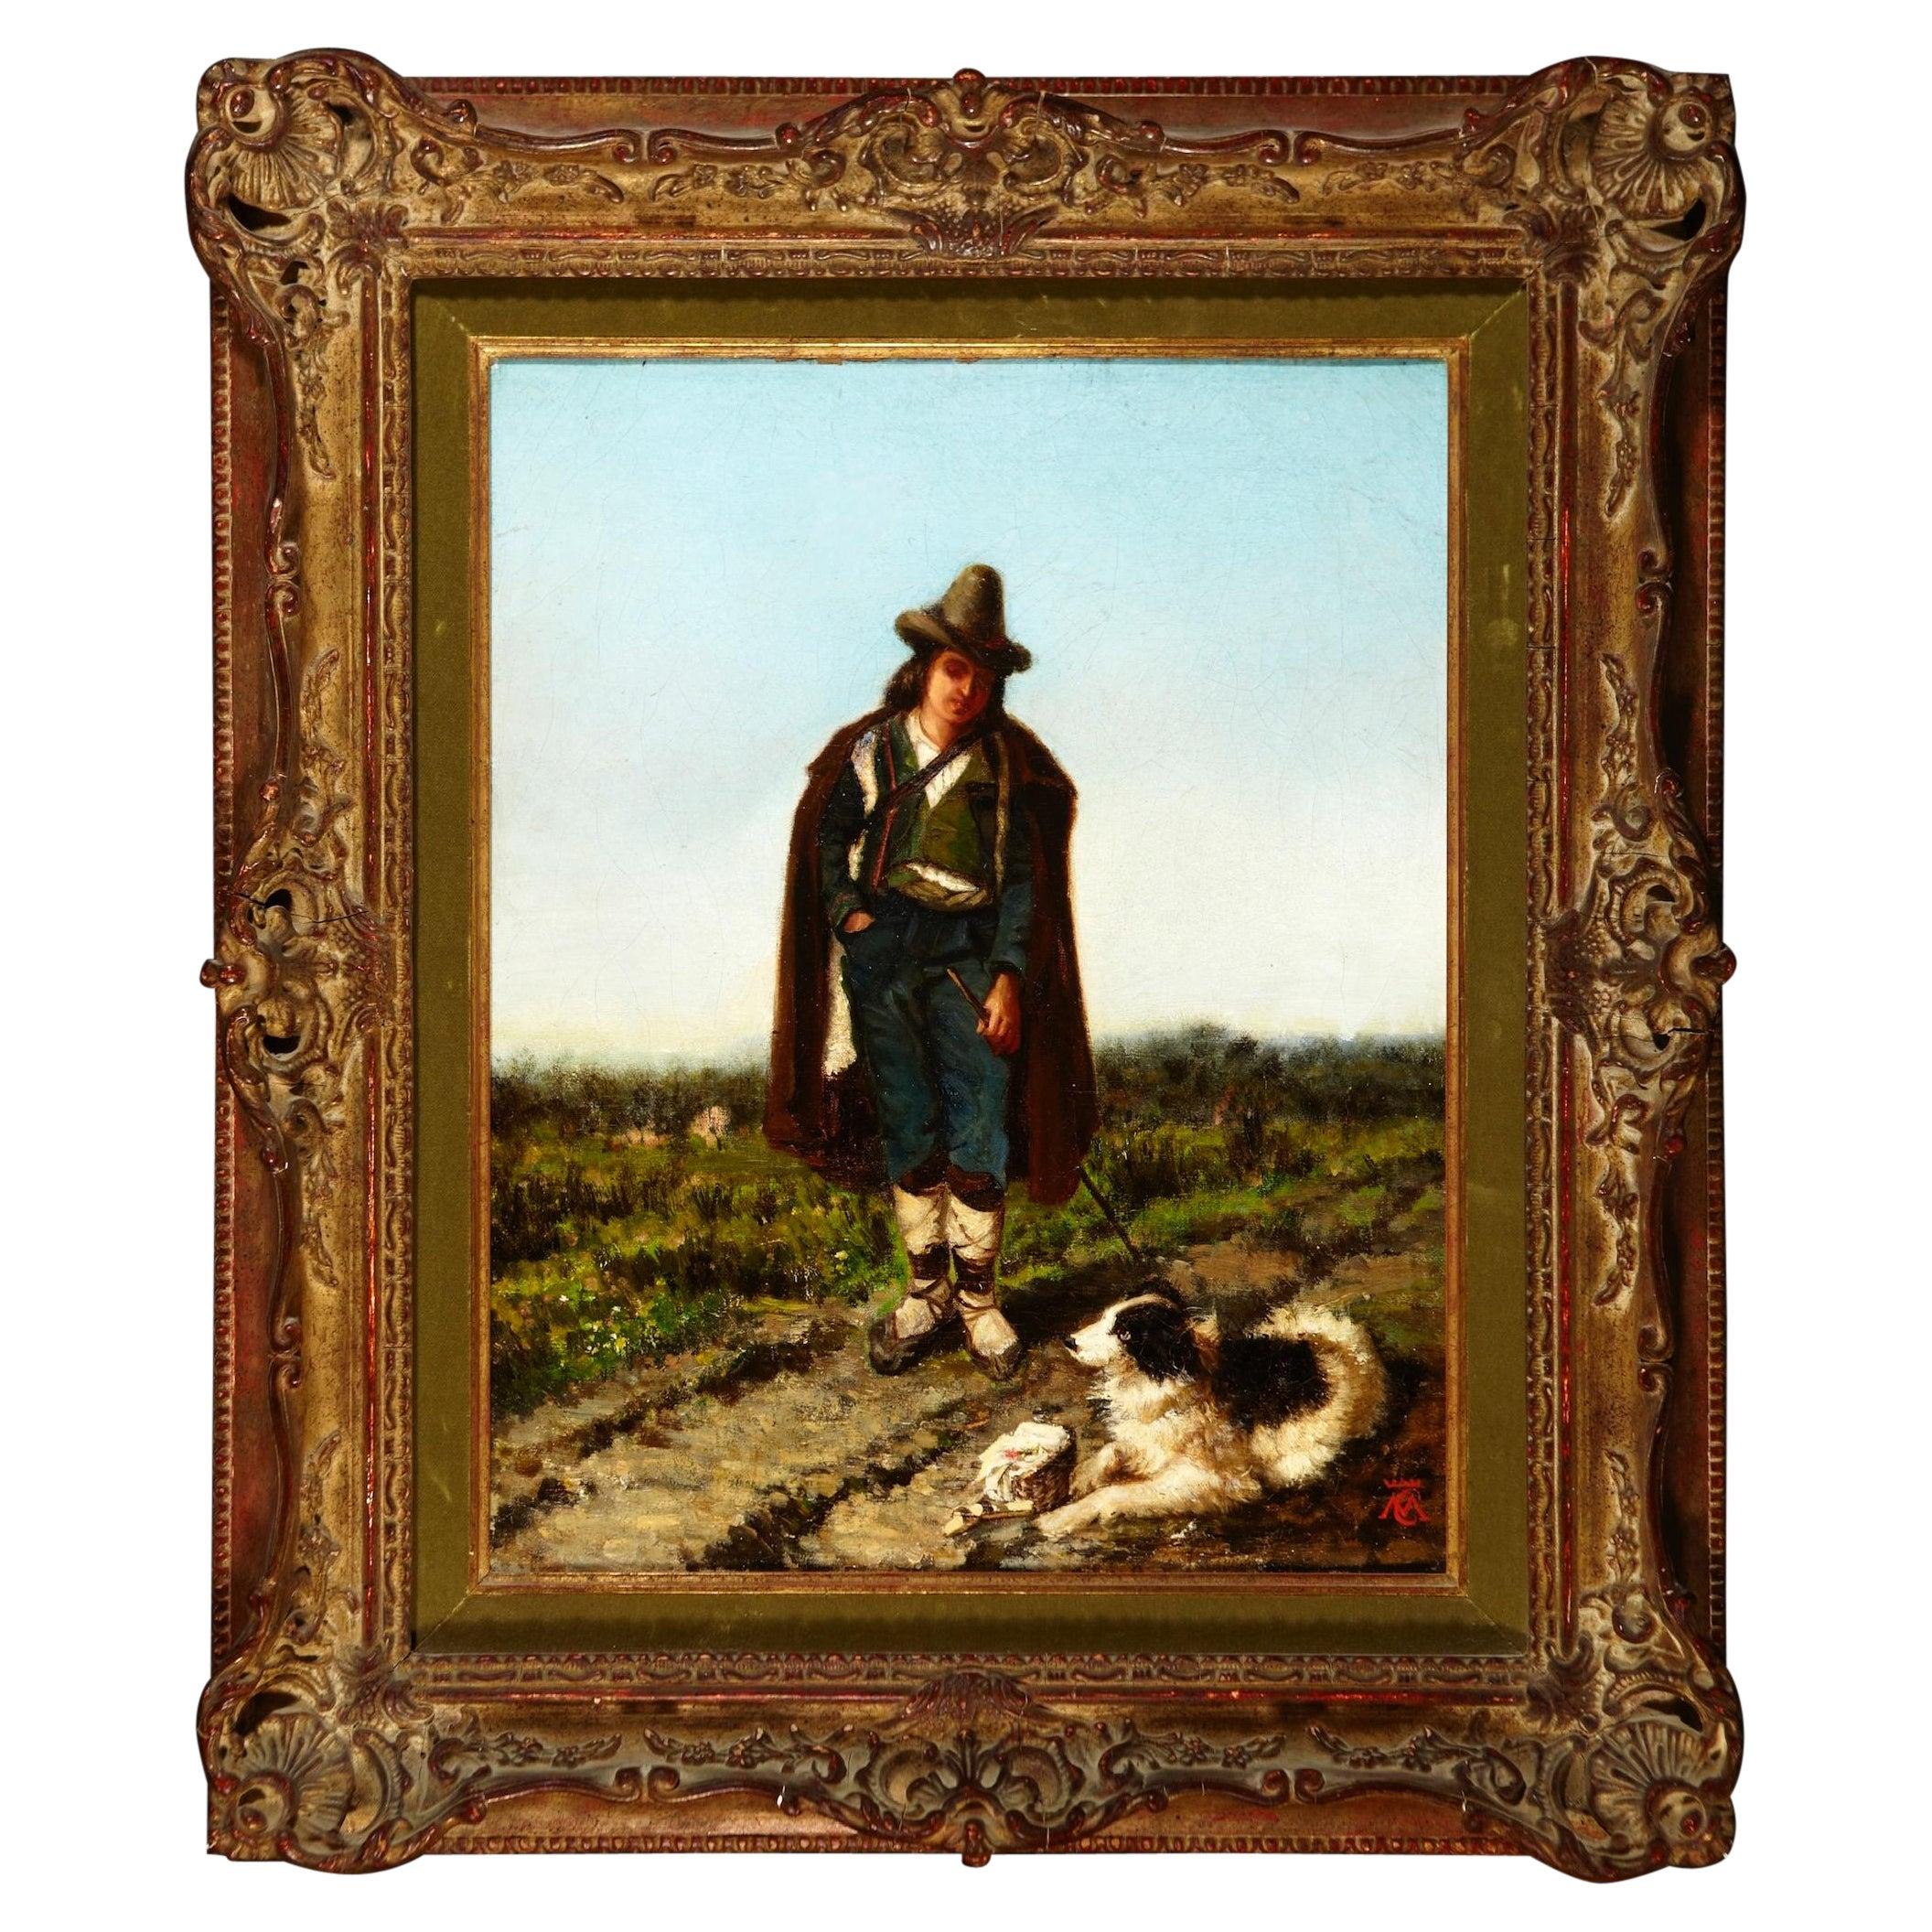 Unknown Portrait Painting - 19th Century European Oil Painting of an Old Man and His Dog